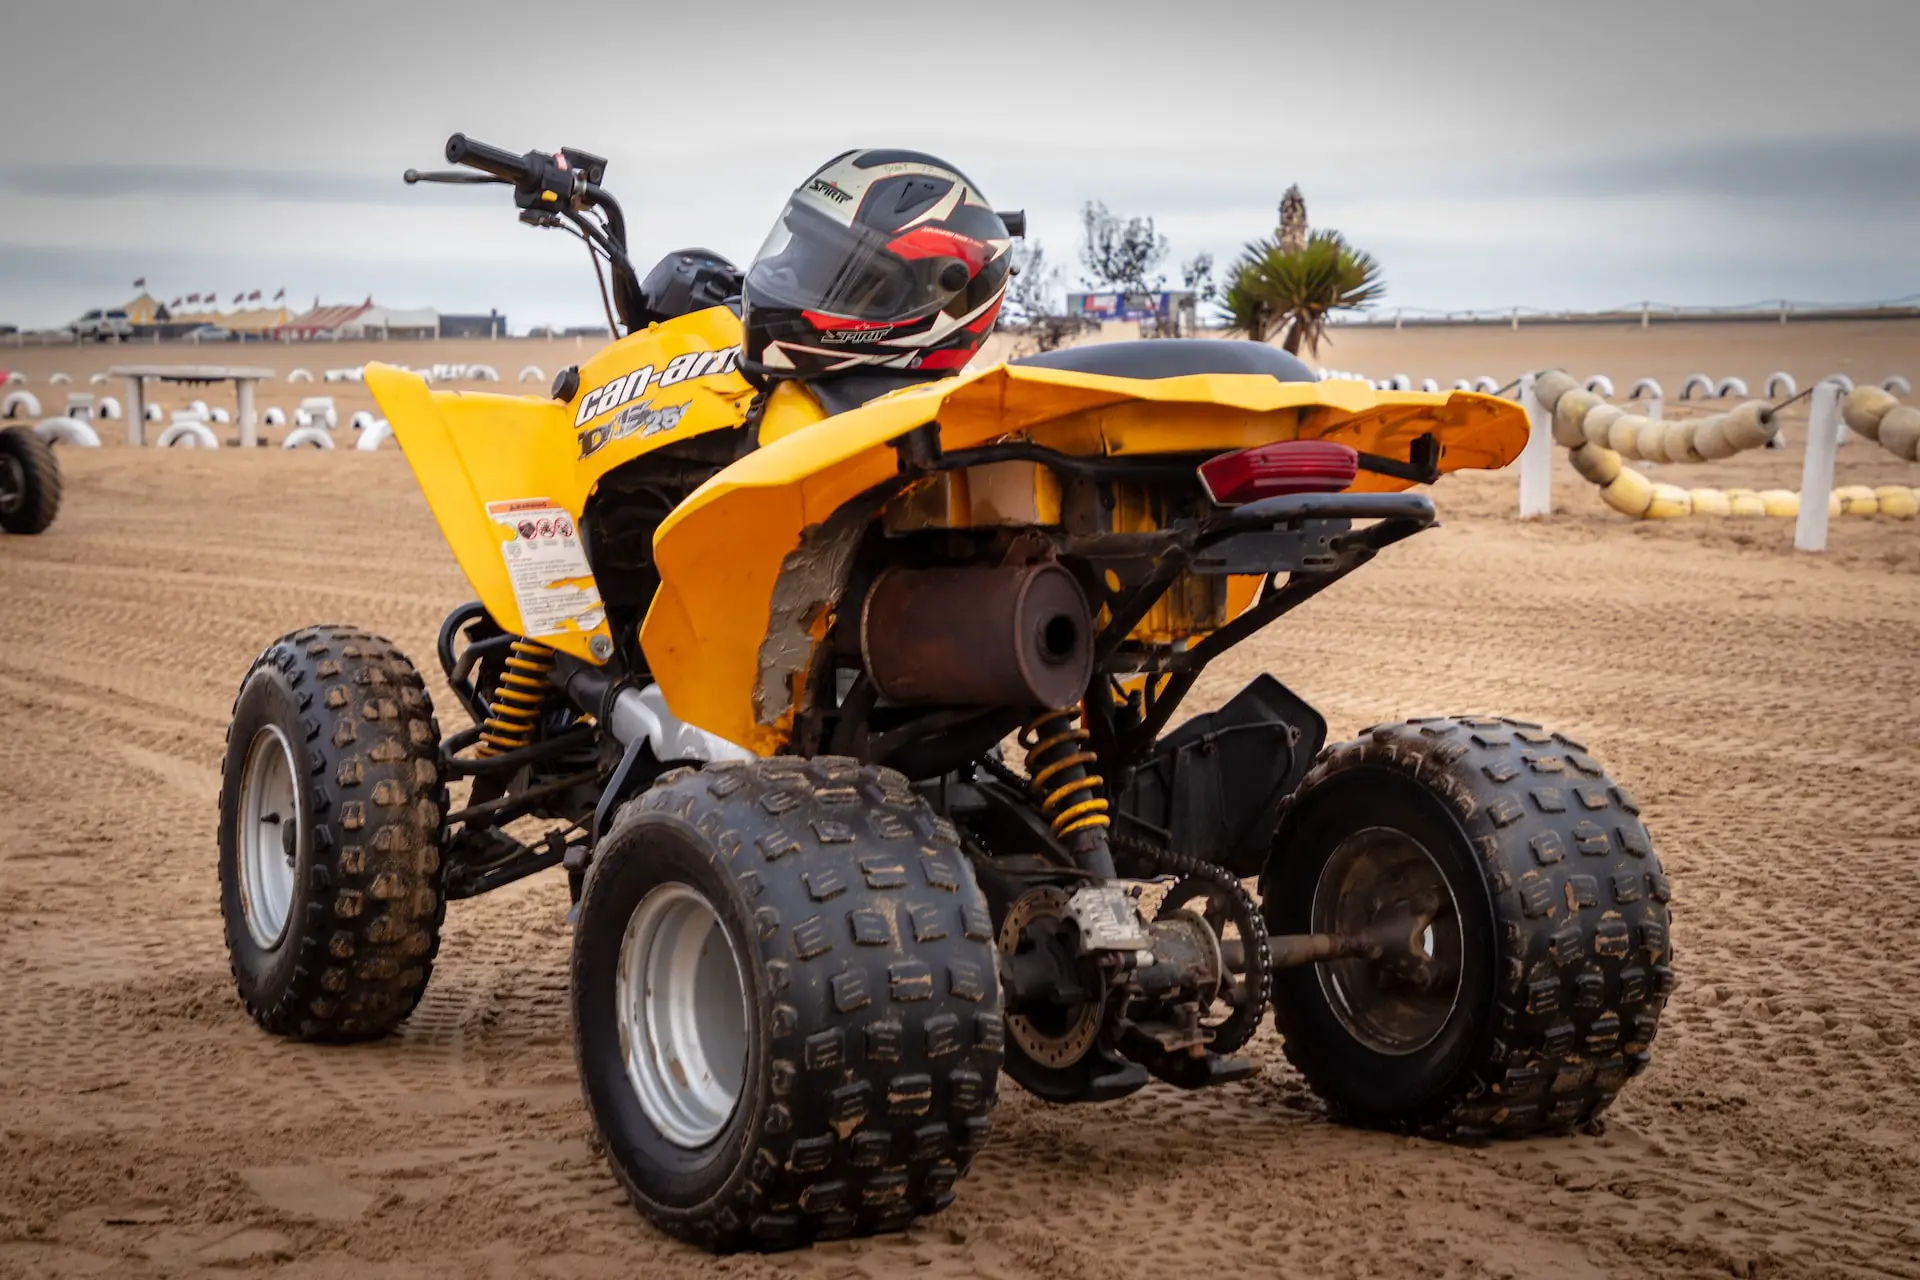 Are ATVs covered under homeowner's insurance?